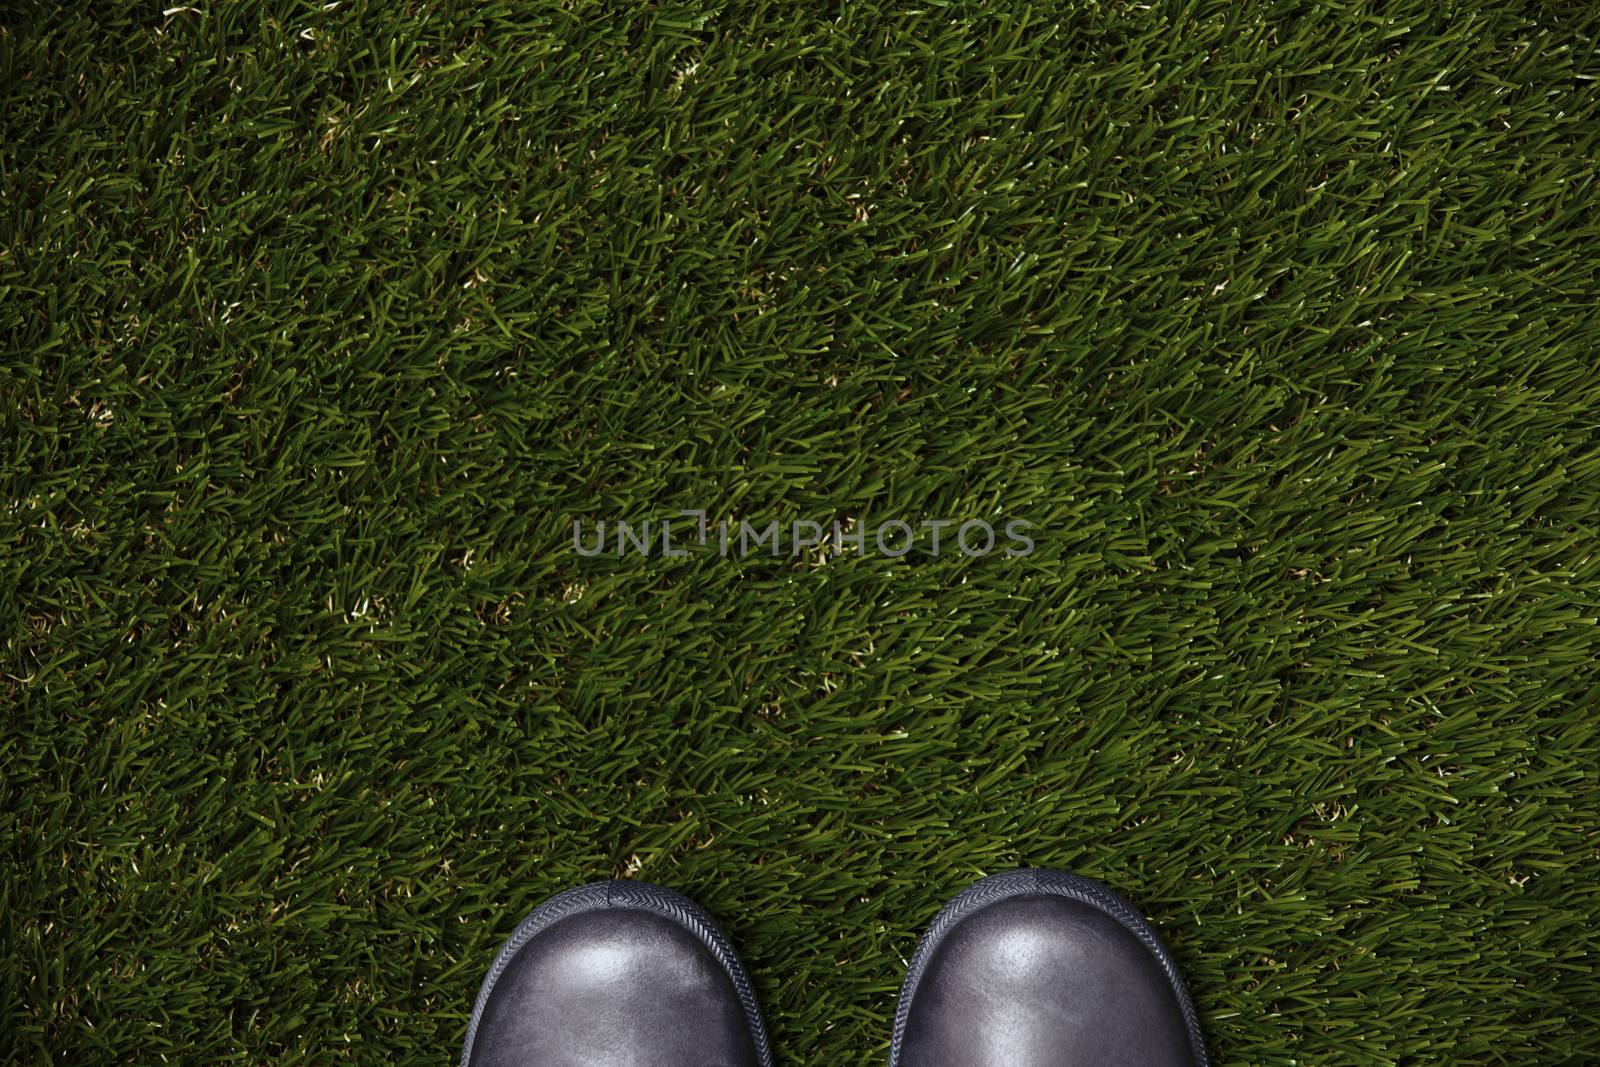 Boots on a grass by Novic